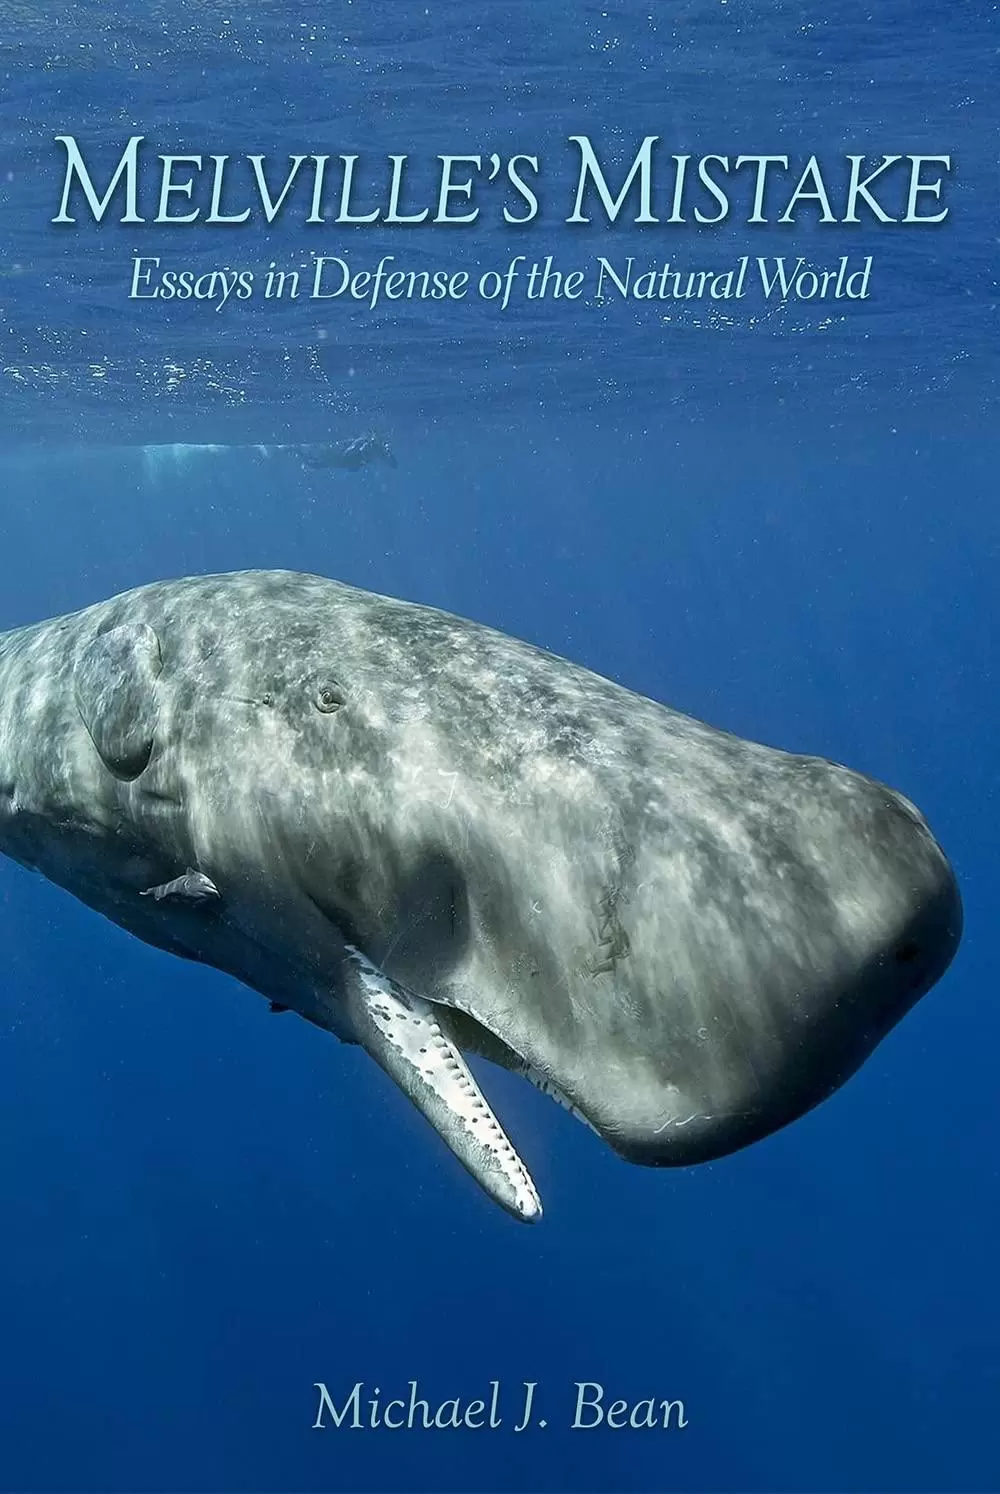 Book cover of Melville's Mistake: Essays in Defense of the Natural World